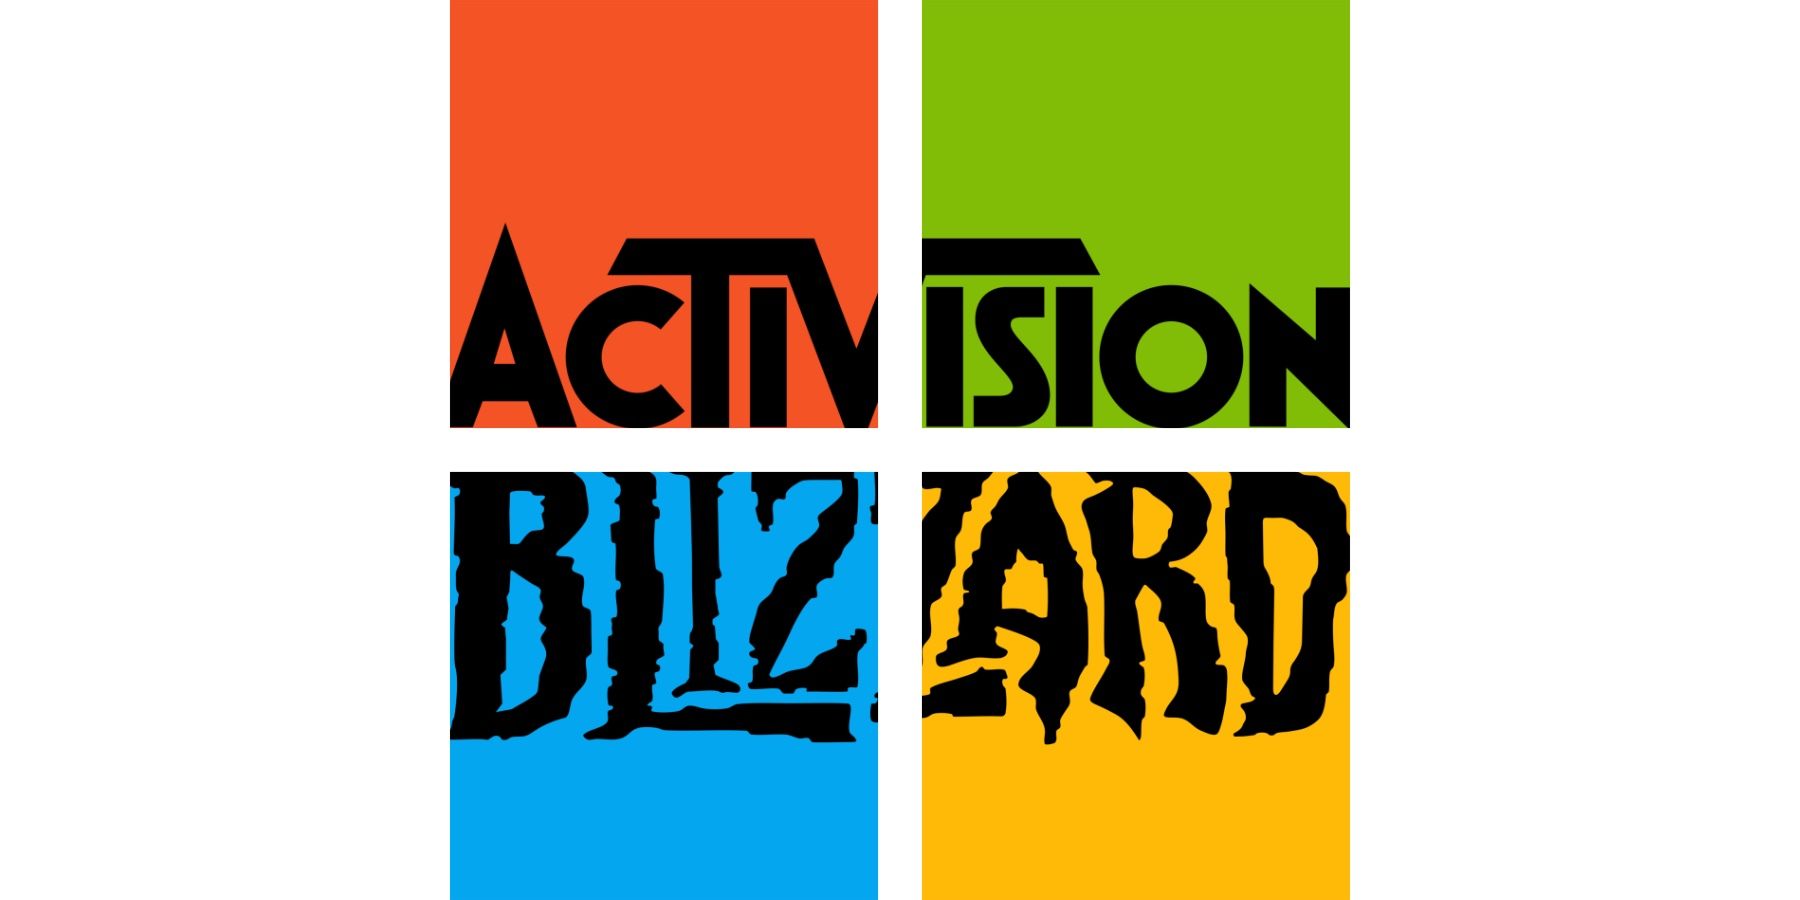 Microsoft completes Activision Blizzard deal: Everything you need to know -  Dexerto